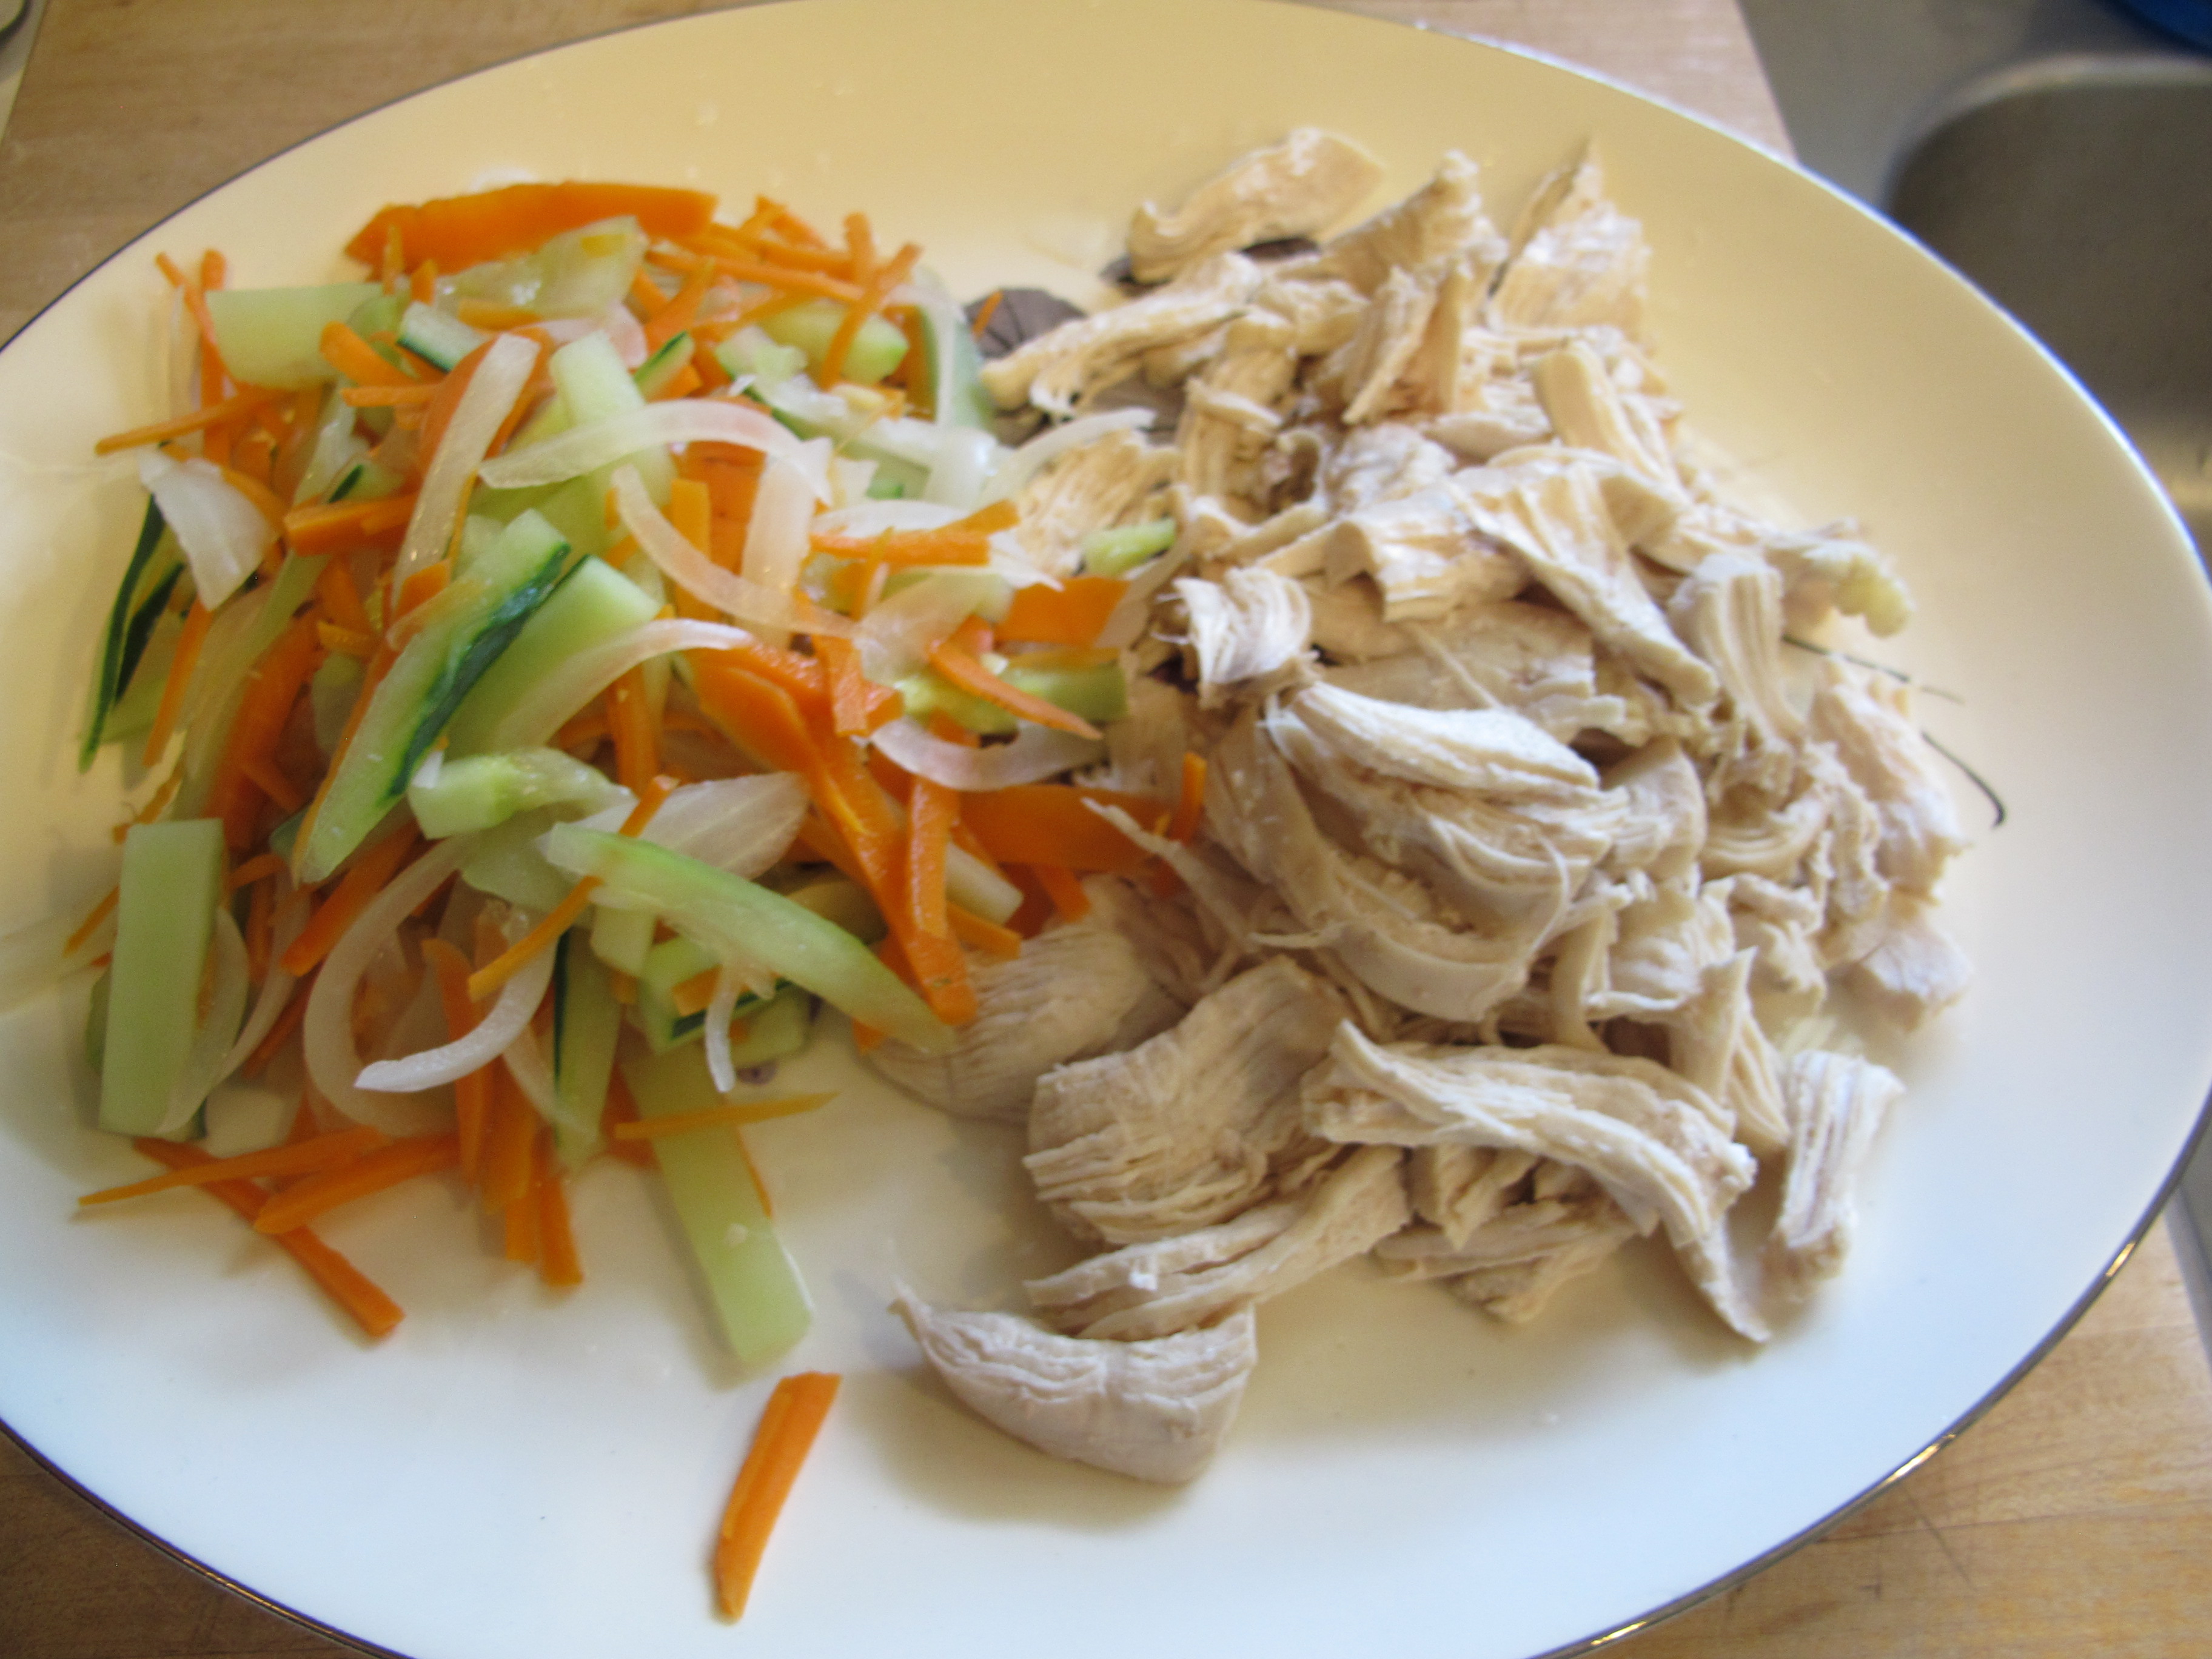 Boiled chicken breast and vegetables - Quick Easy Recipes Dinner